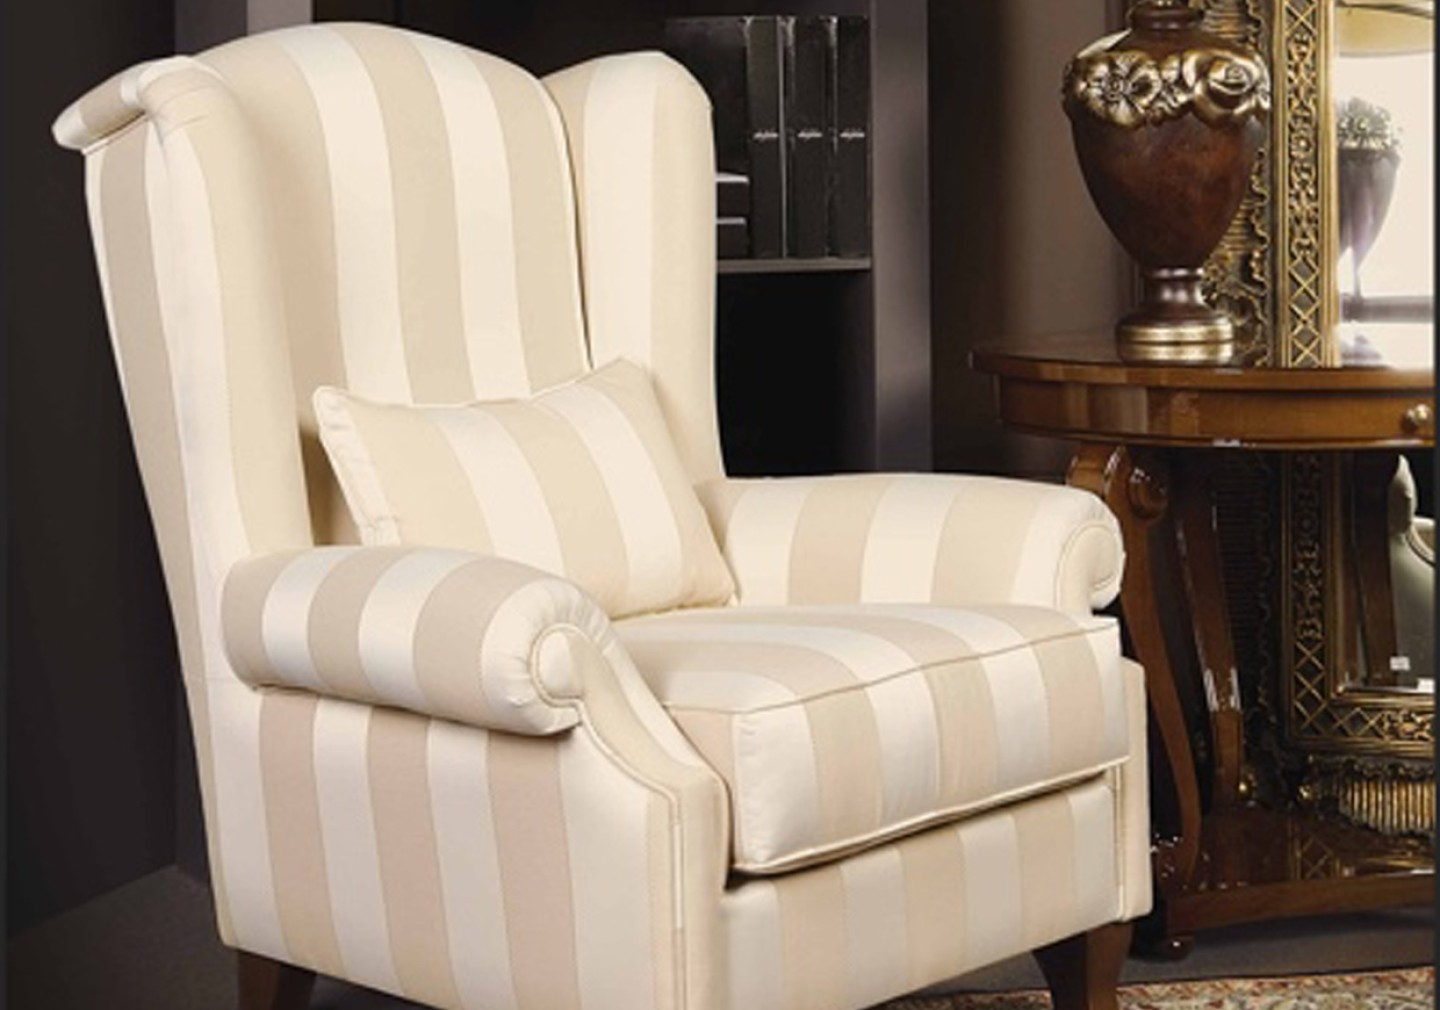 THE PARMA CLASSIC ARMCHAIR